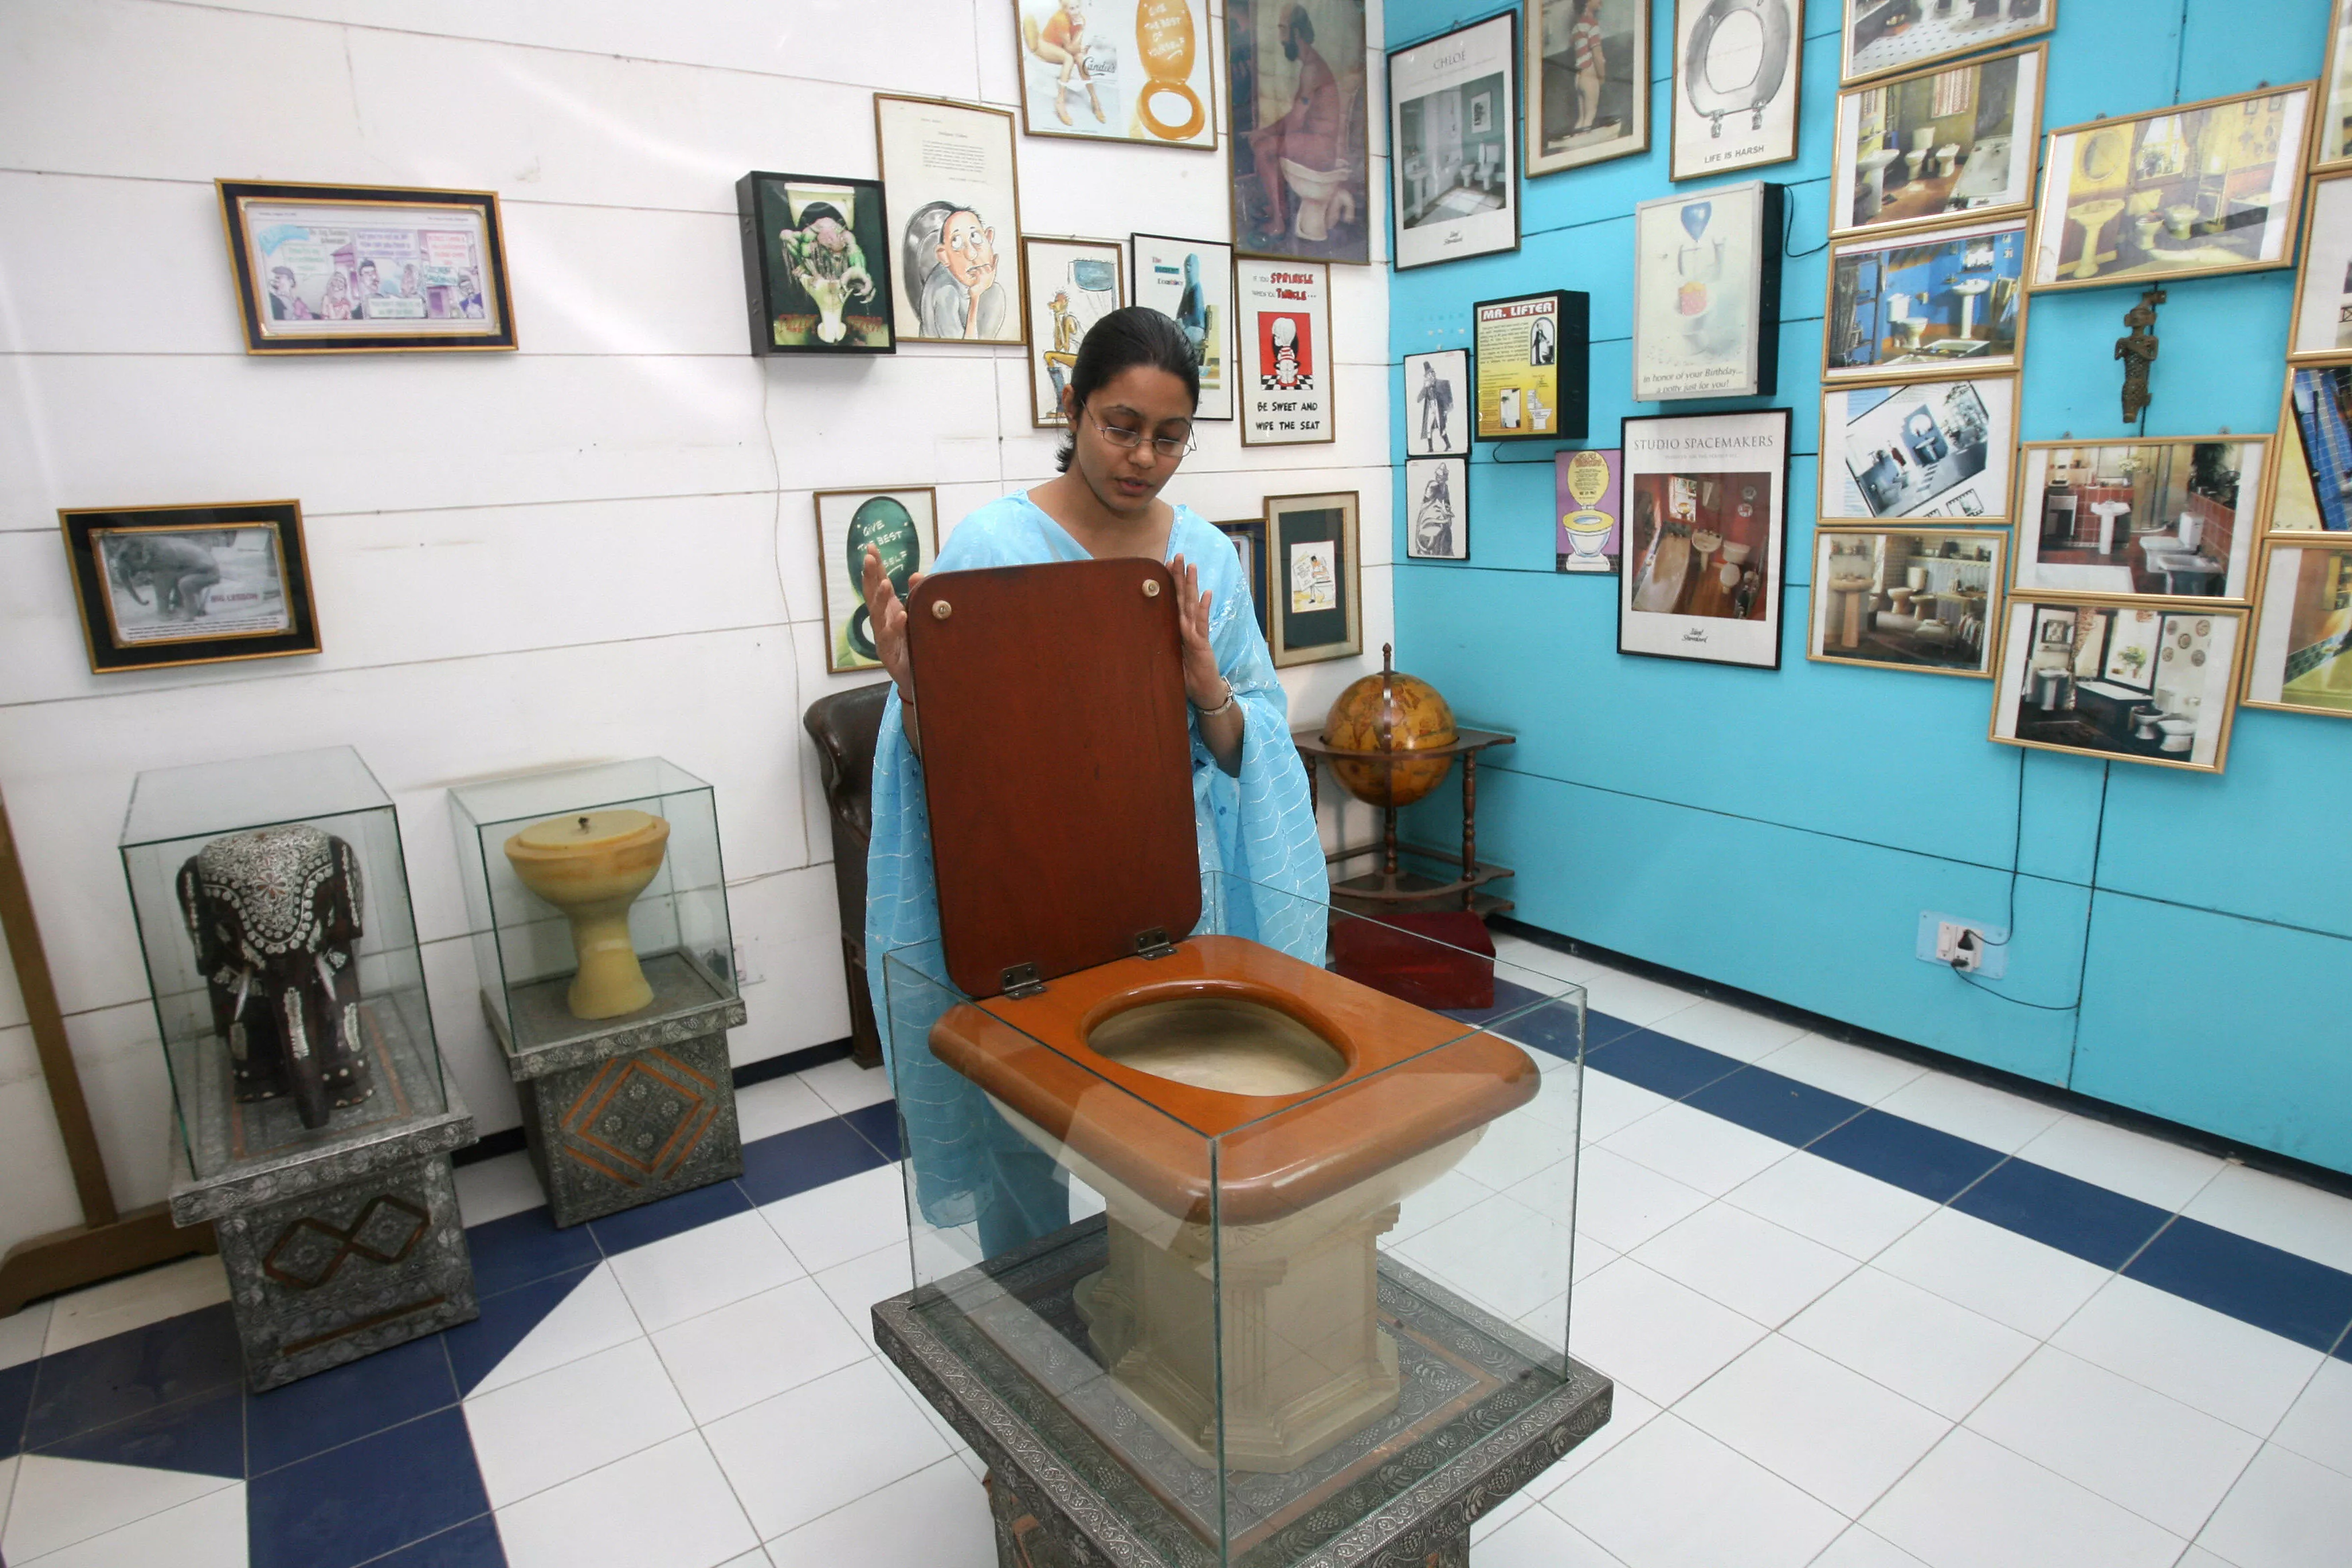 The Sulabh International Museum of Toilets in India, Central Asia | Museums - Rated 3.5